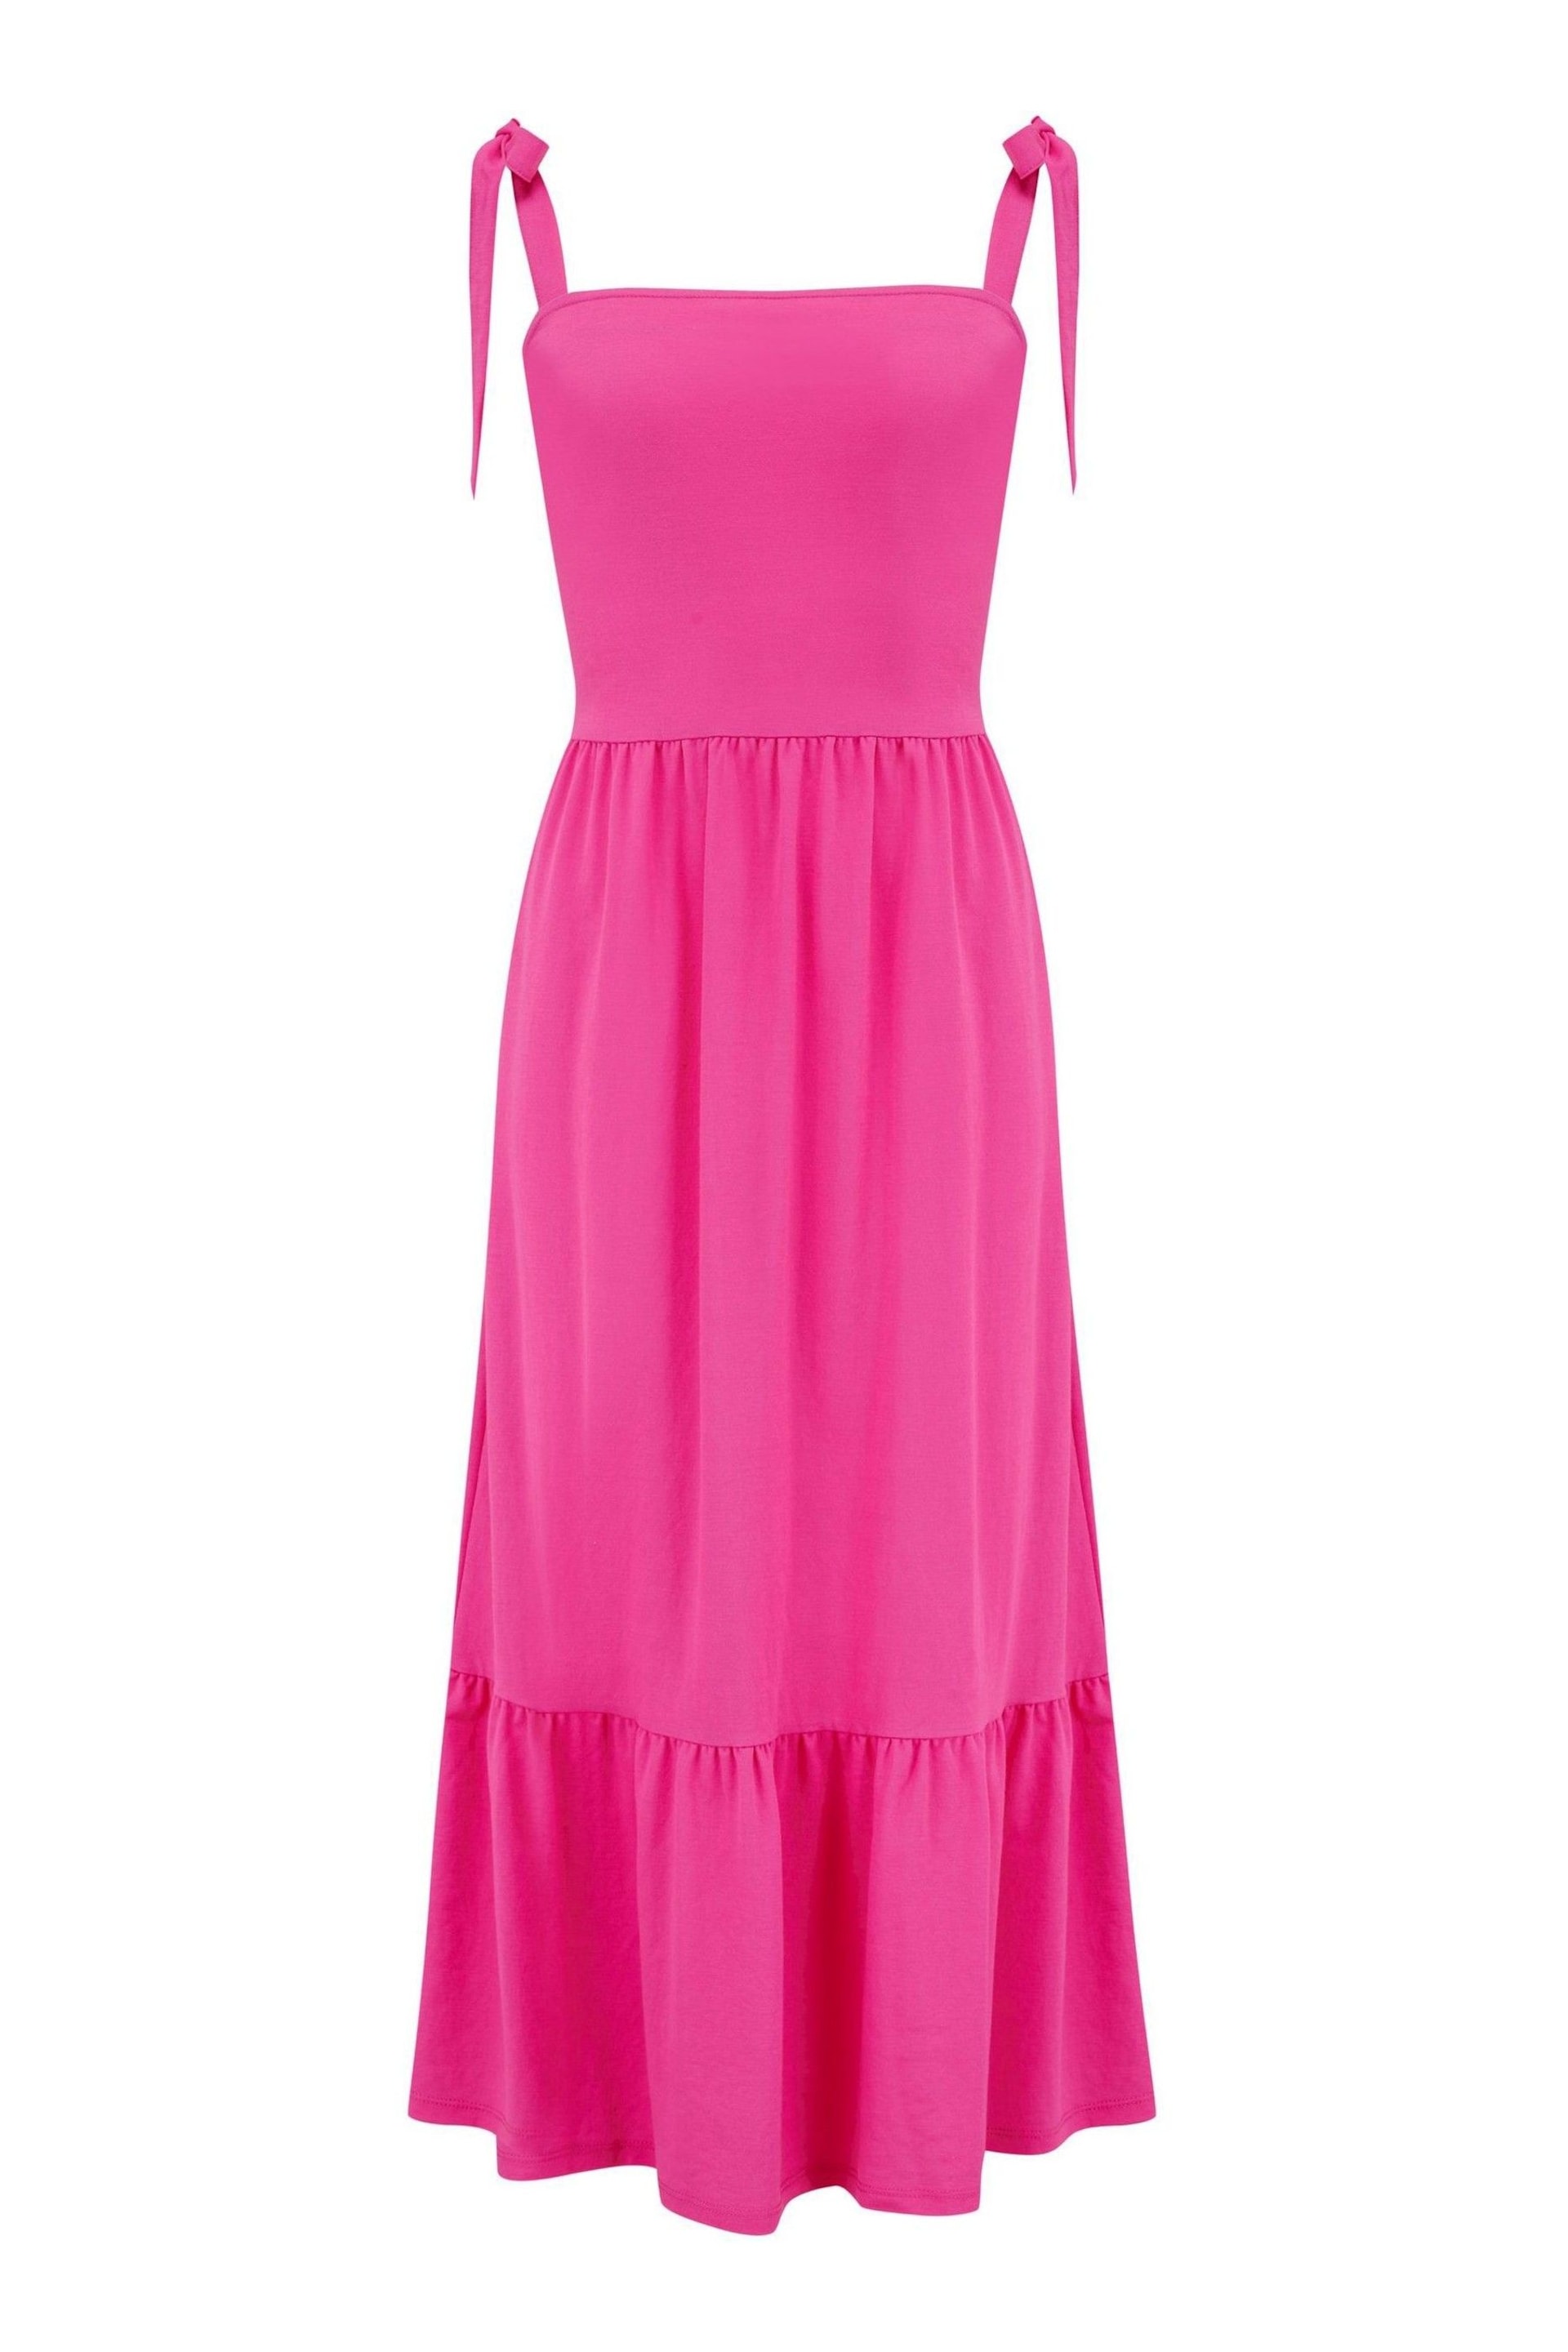 Pour Moi Pink Laura Jersey Tie Strap Tiered Midi Dress - Image 3 of 4